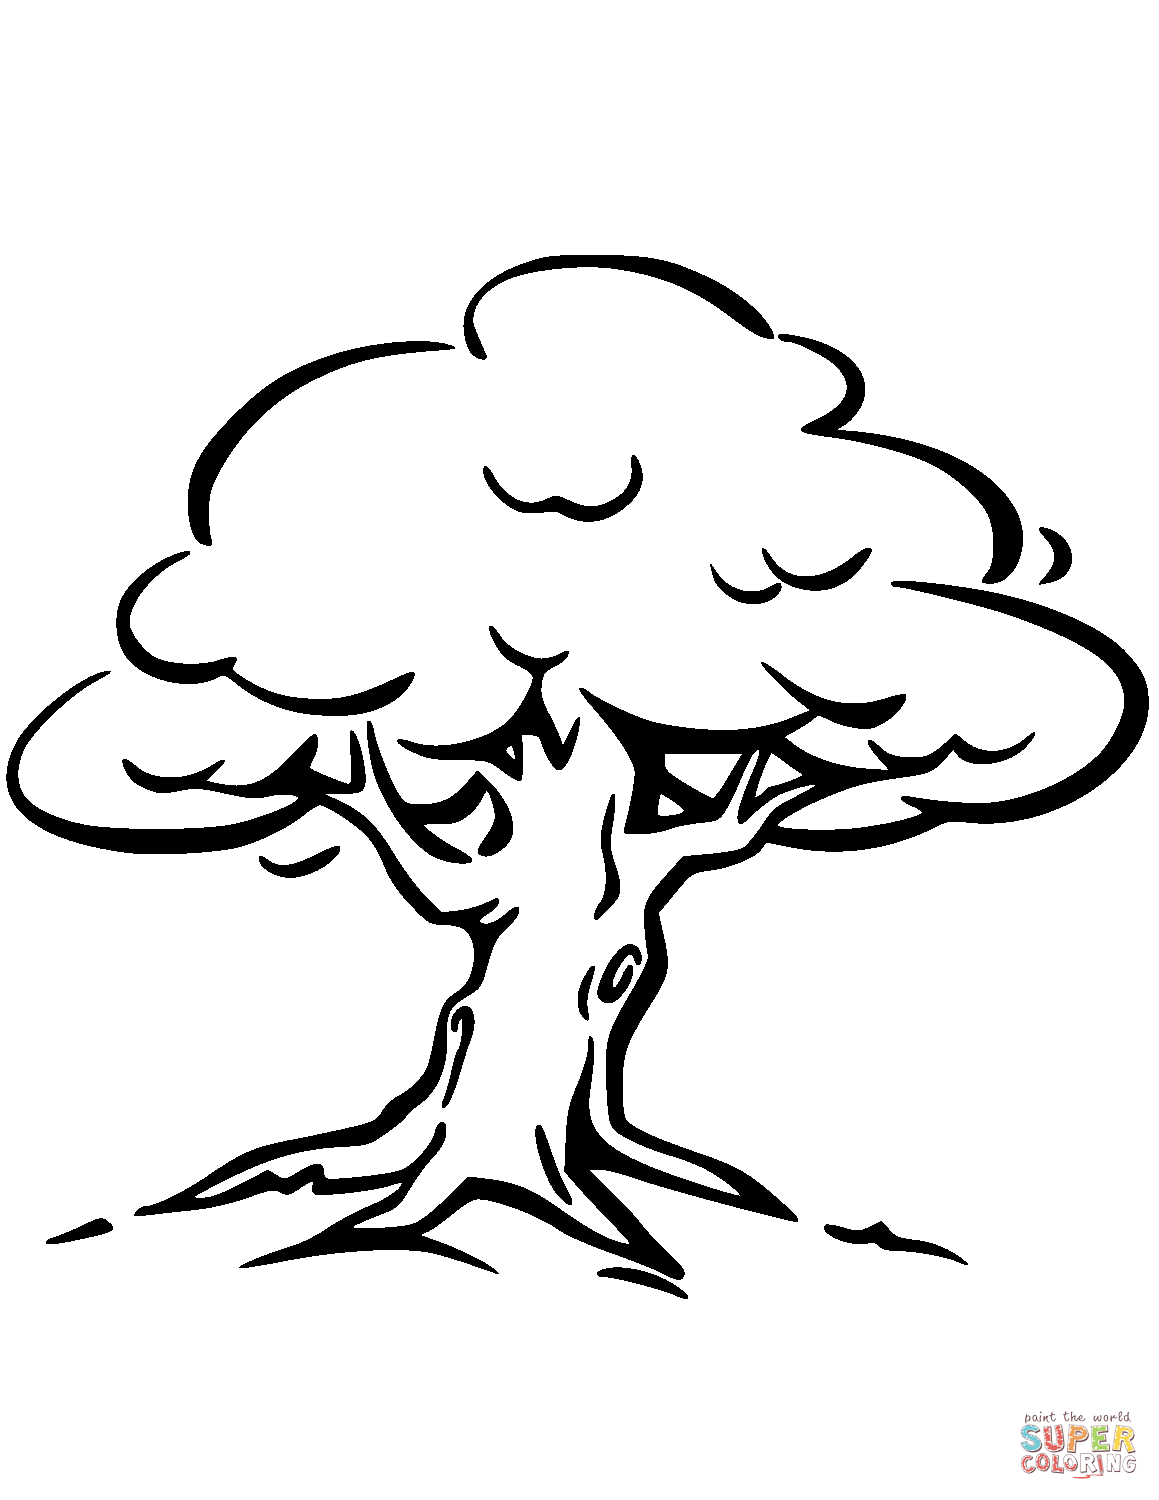 Tree trunk coloring page free printable coloring pages